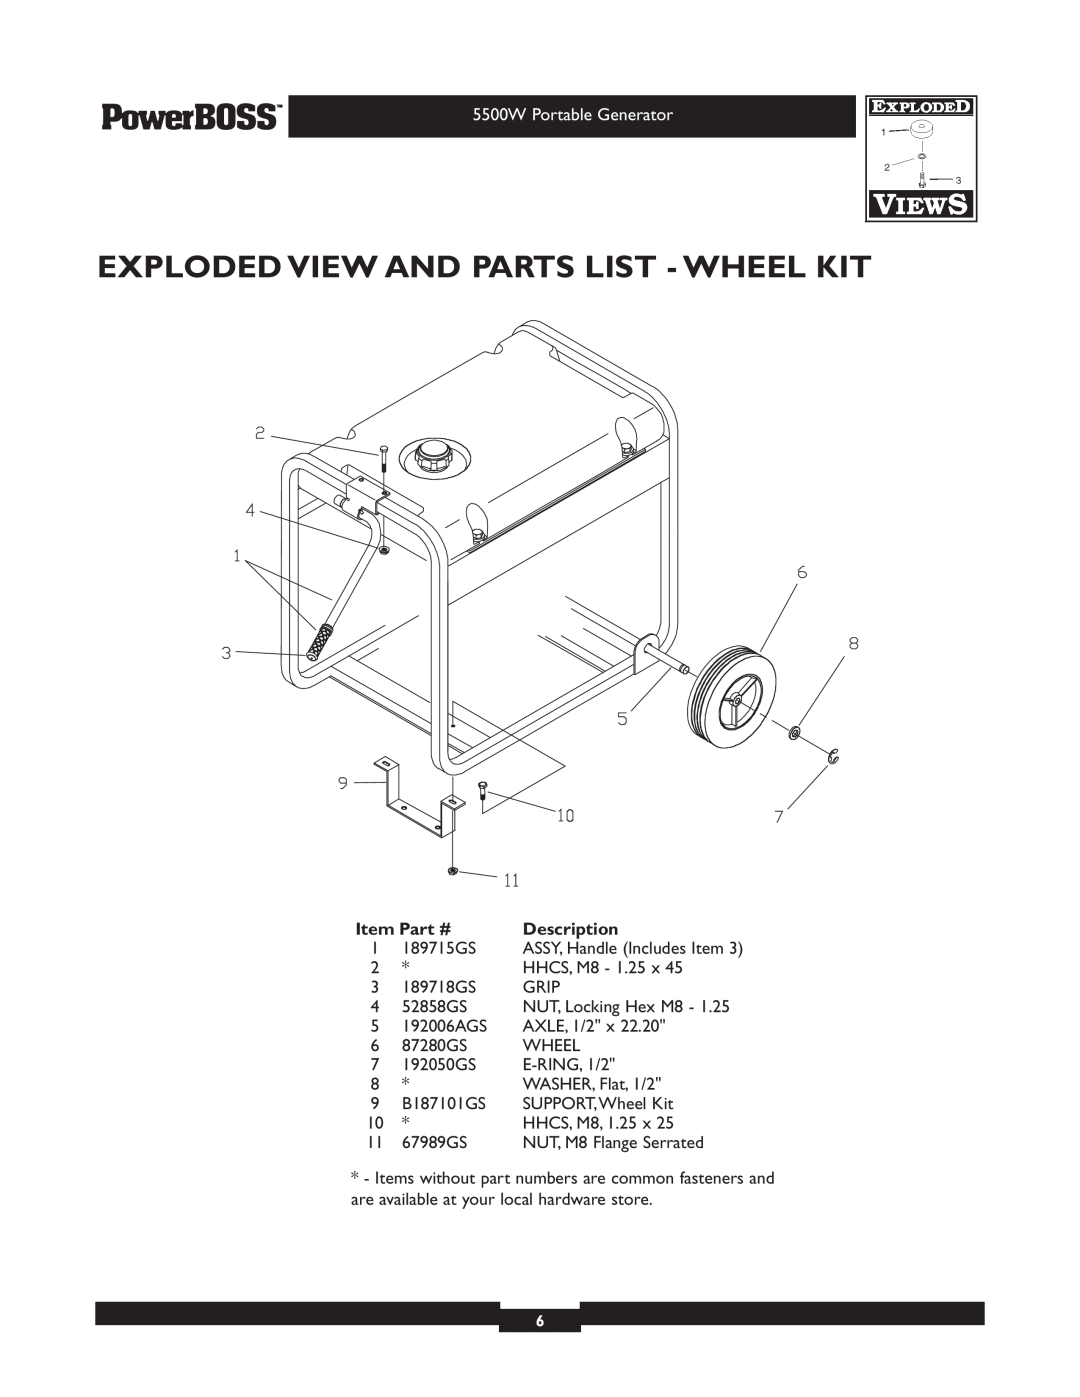 Briggs & Stratton 30221 manual Exploded View And Parts List - Wheel Kit, 5500W Portable Generator, Description 